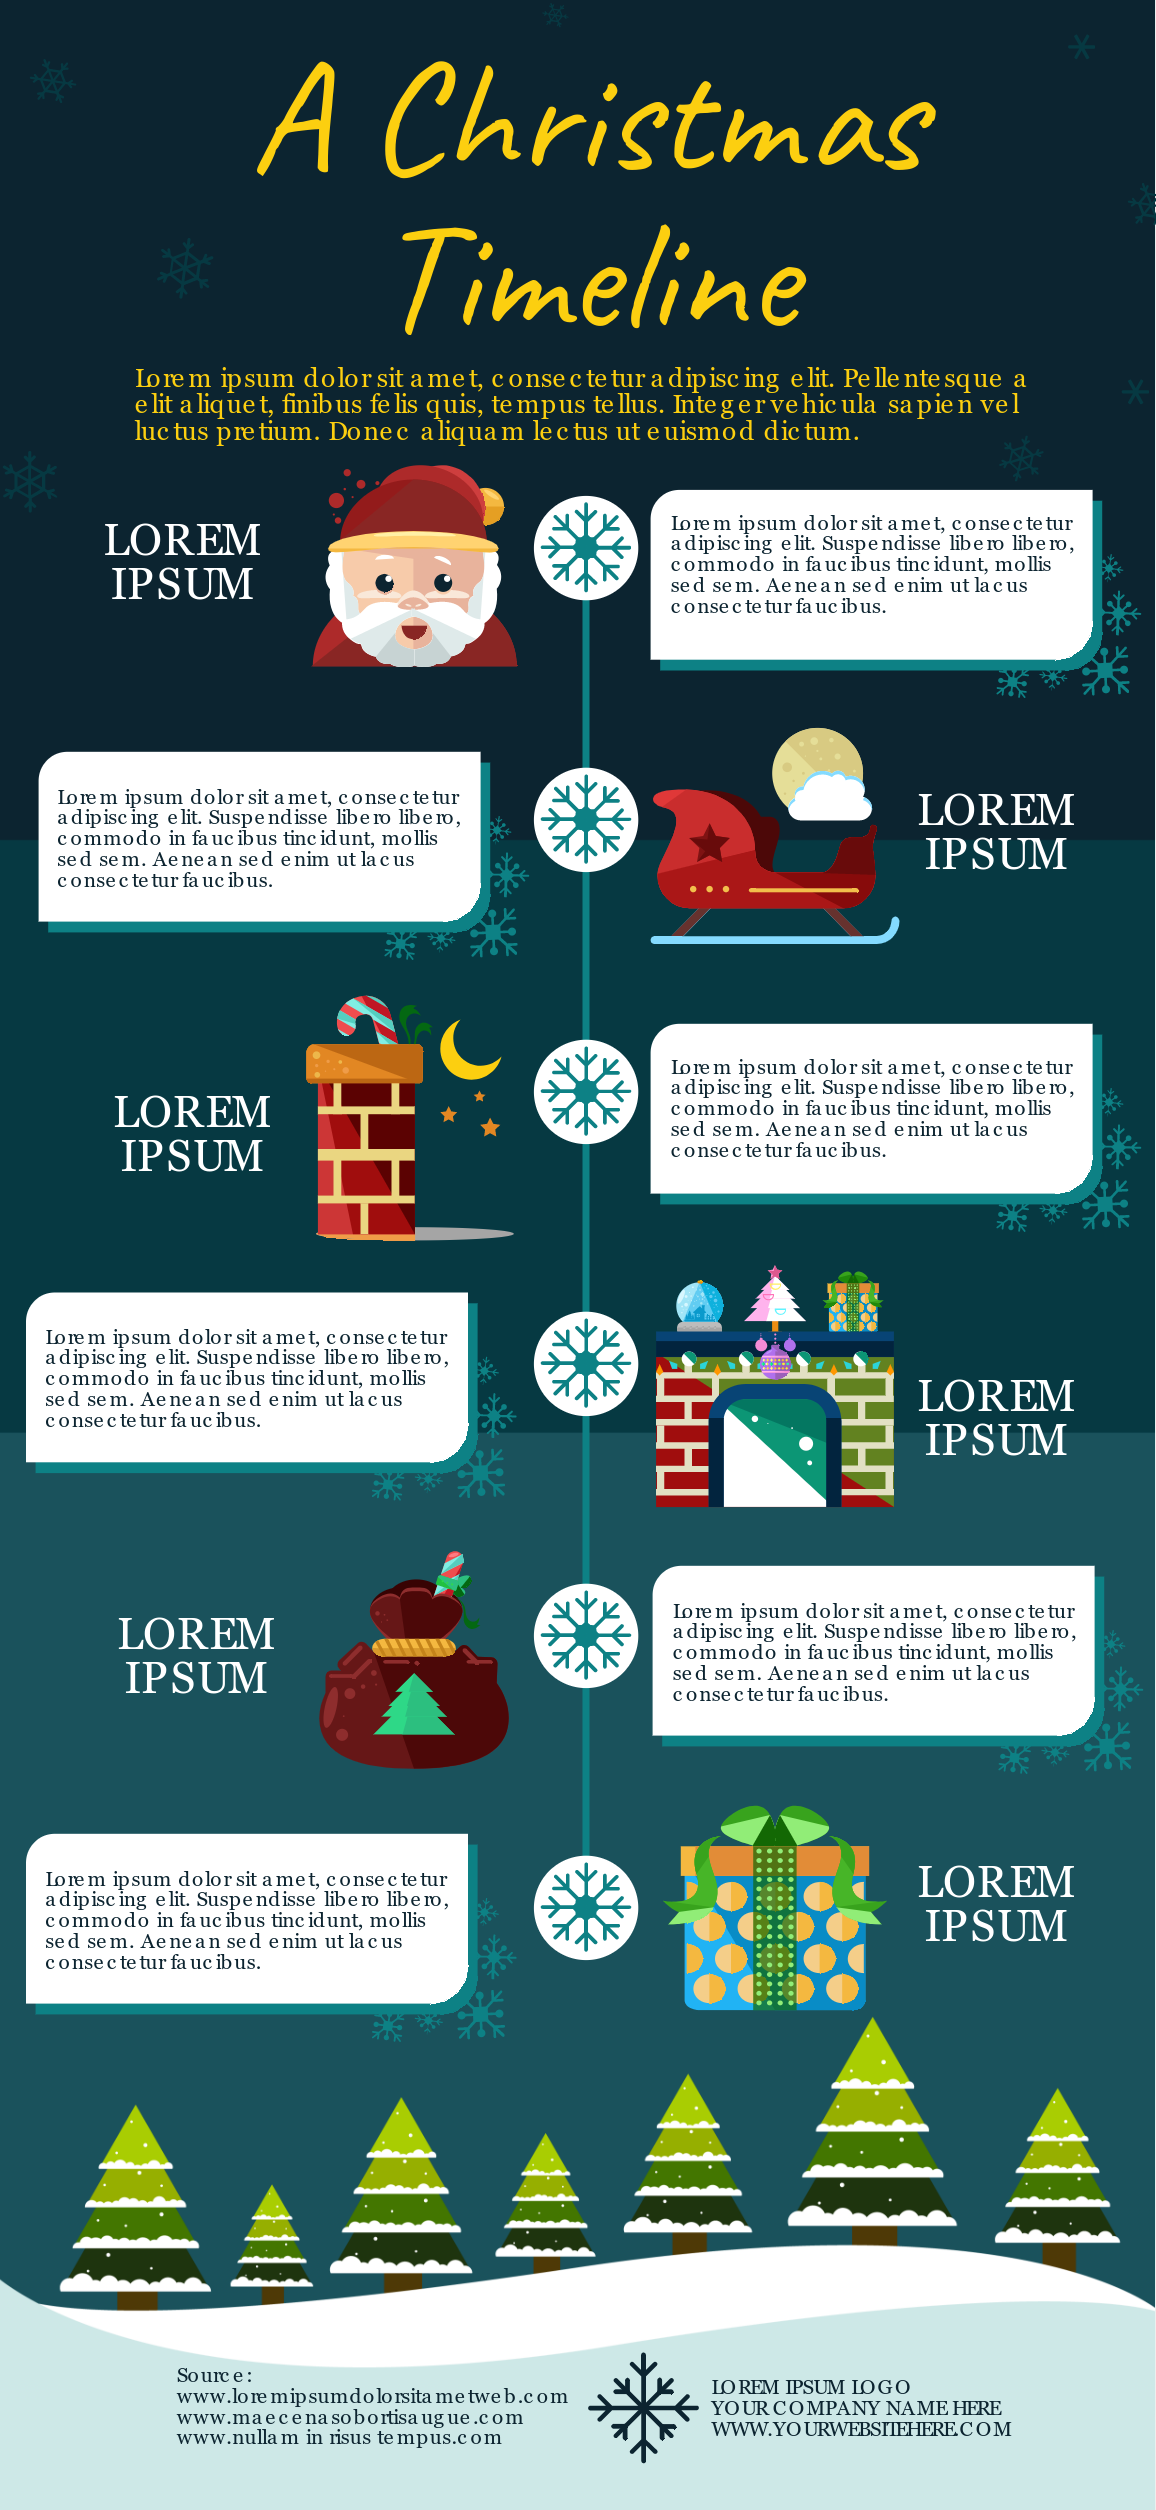 Easelly 10 Free Holiday Infographic Templates You Can Customize Quickly